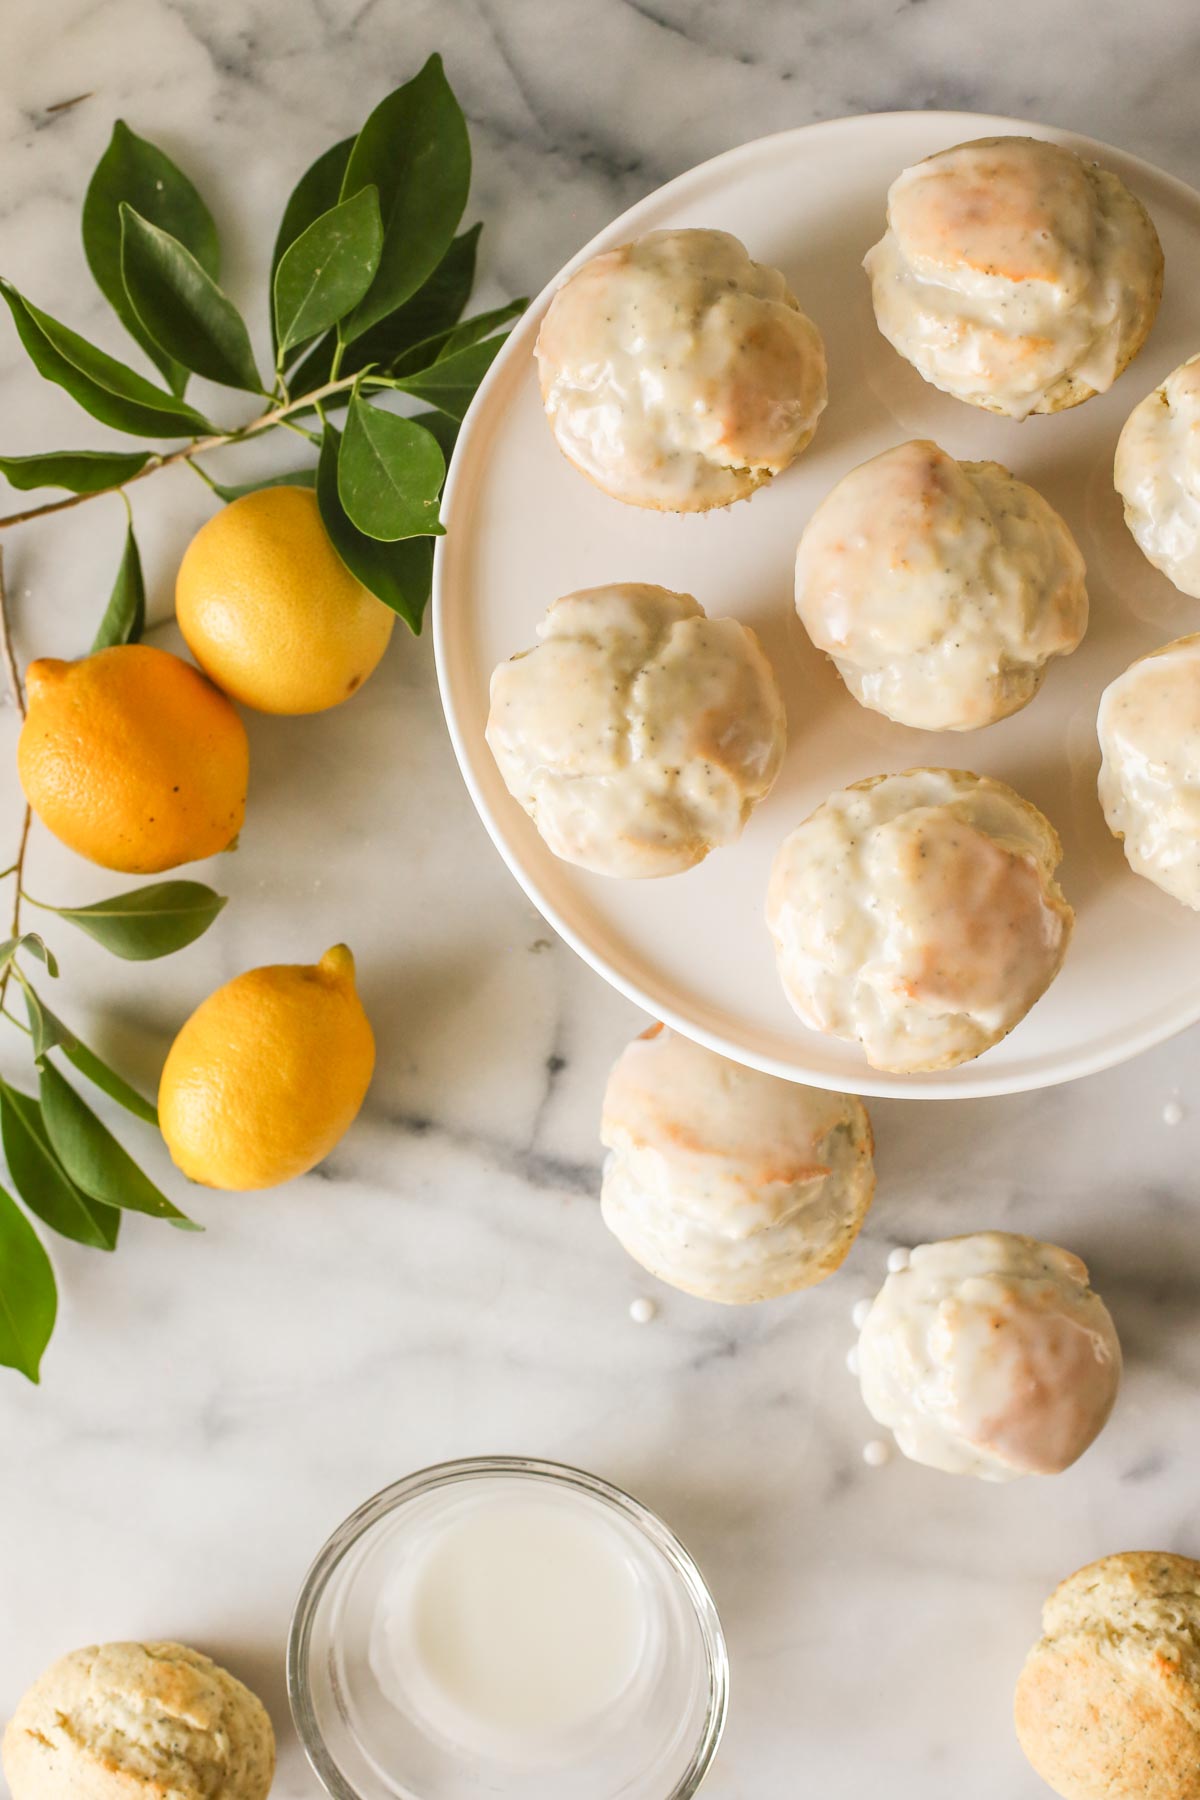 Overhead shot of Glazed Lemon Poppy Seed Muffins on a cake stand with two muffins next to the stand and two unglazed muffins next to a glass bowl of glaze, all on a marble background with a branch from a lemon tree and three whole lemons.  